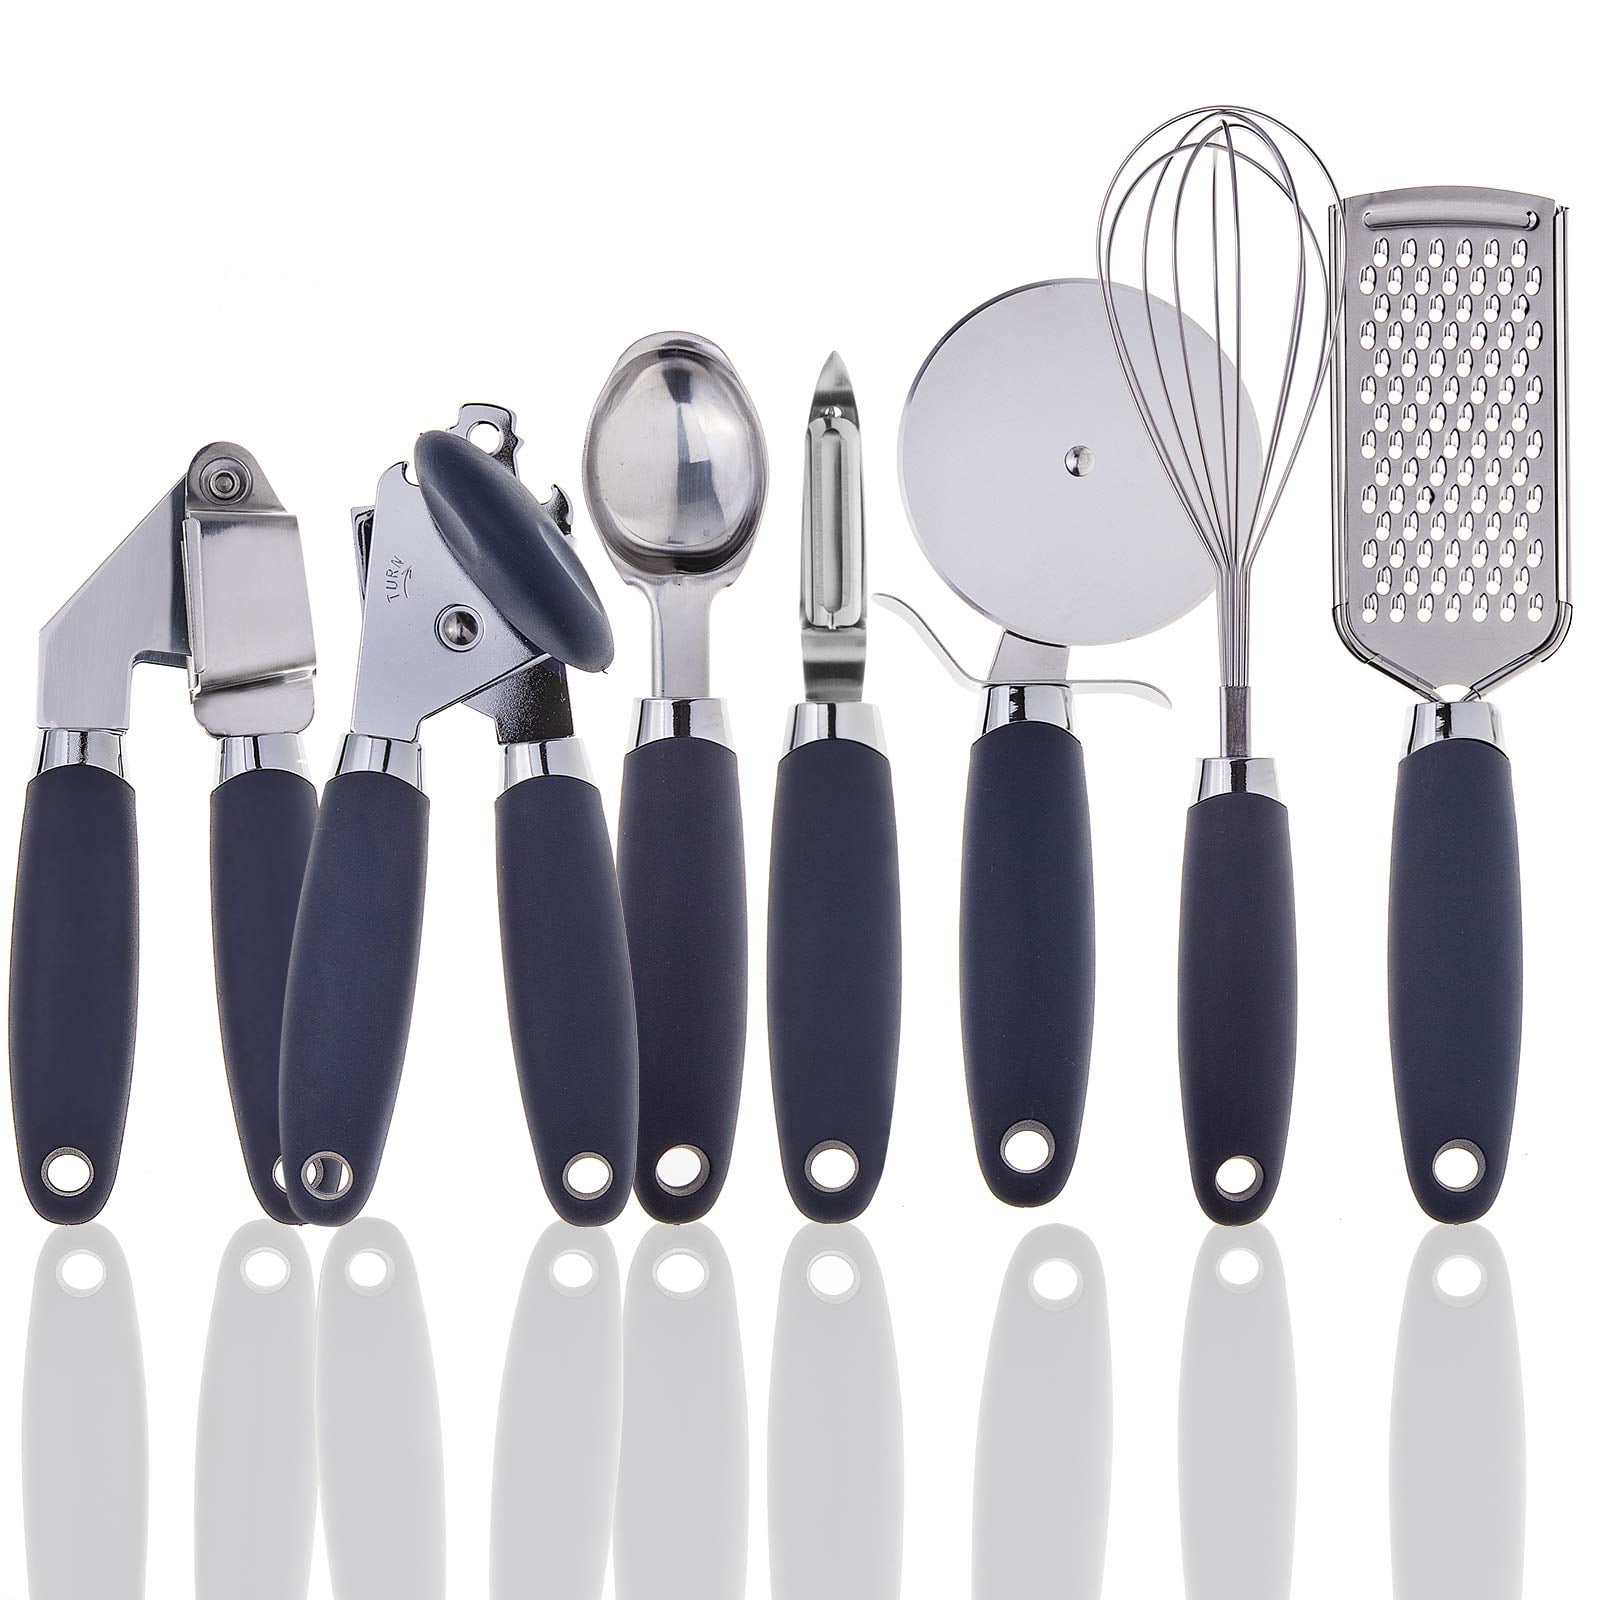 740 Korean Gadgets ideas  cool things to buy, gadgets, cooking tool set